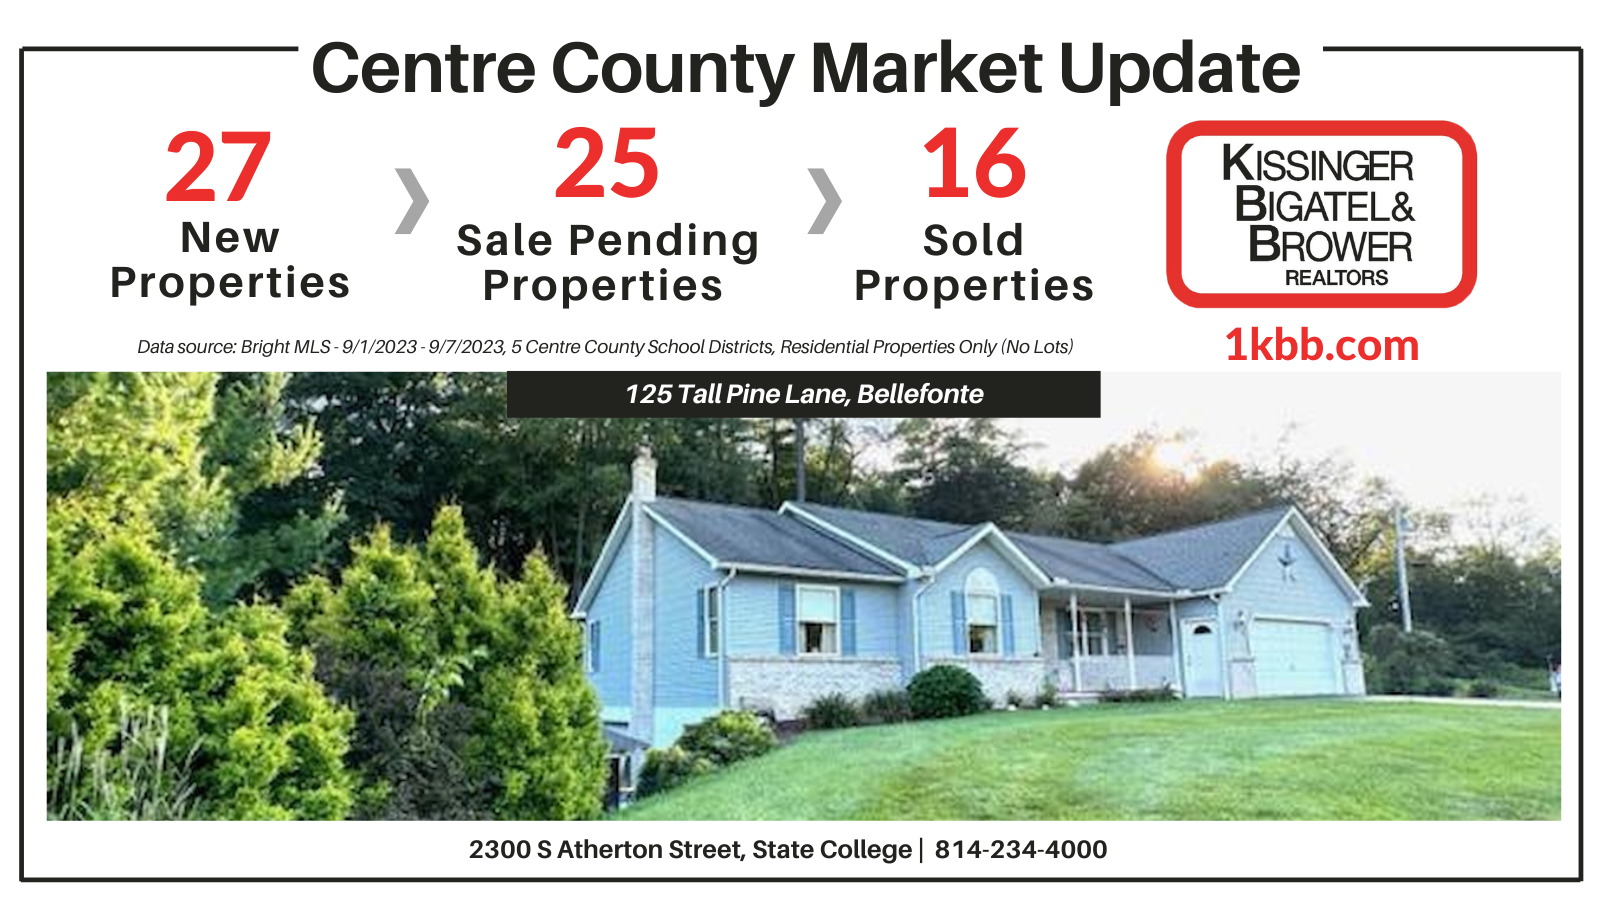 Market Update Report for 9/1/23-9/7/23 in Centre County, PA